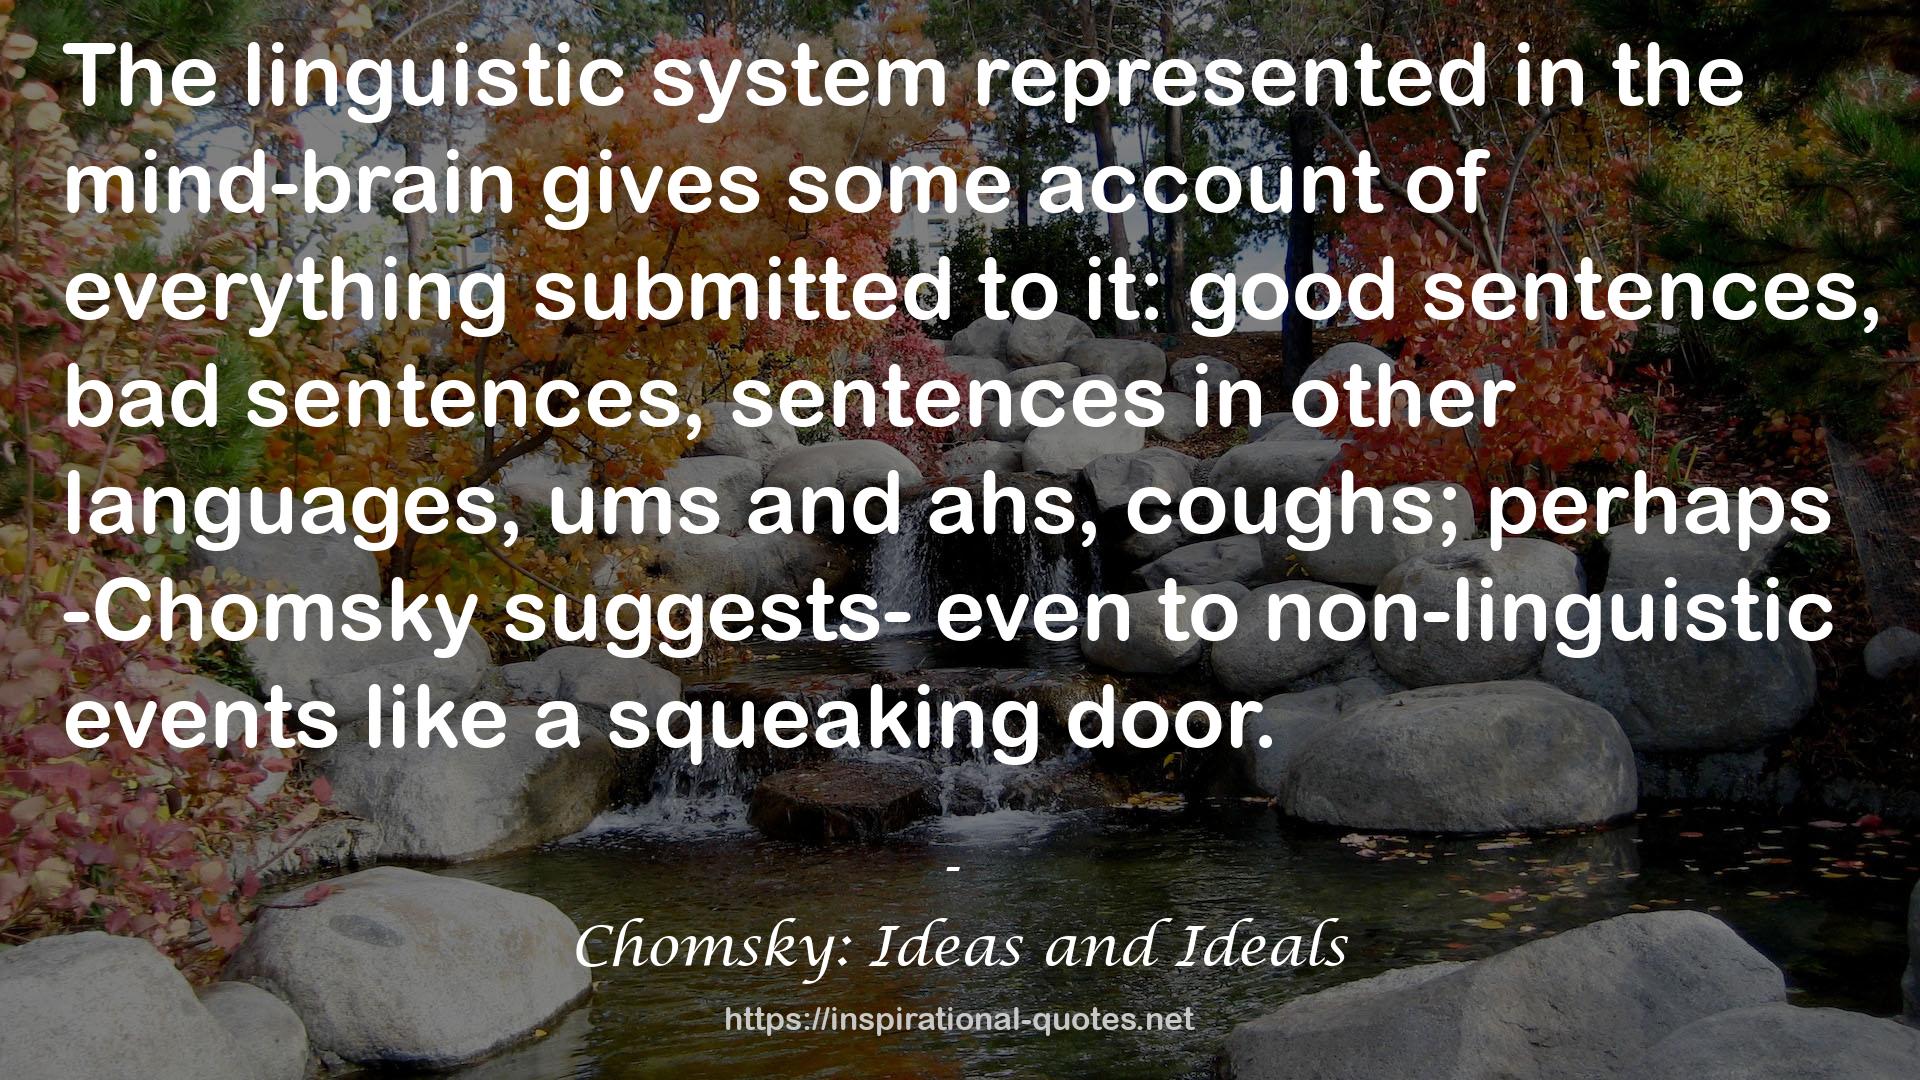 Chomsky: Ideas and Ideals QUOTES